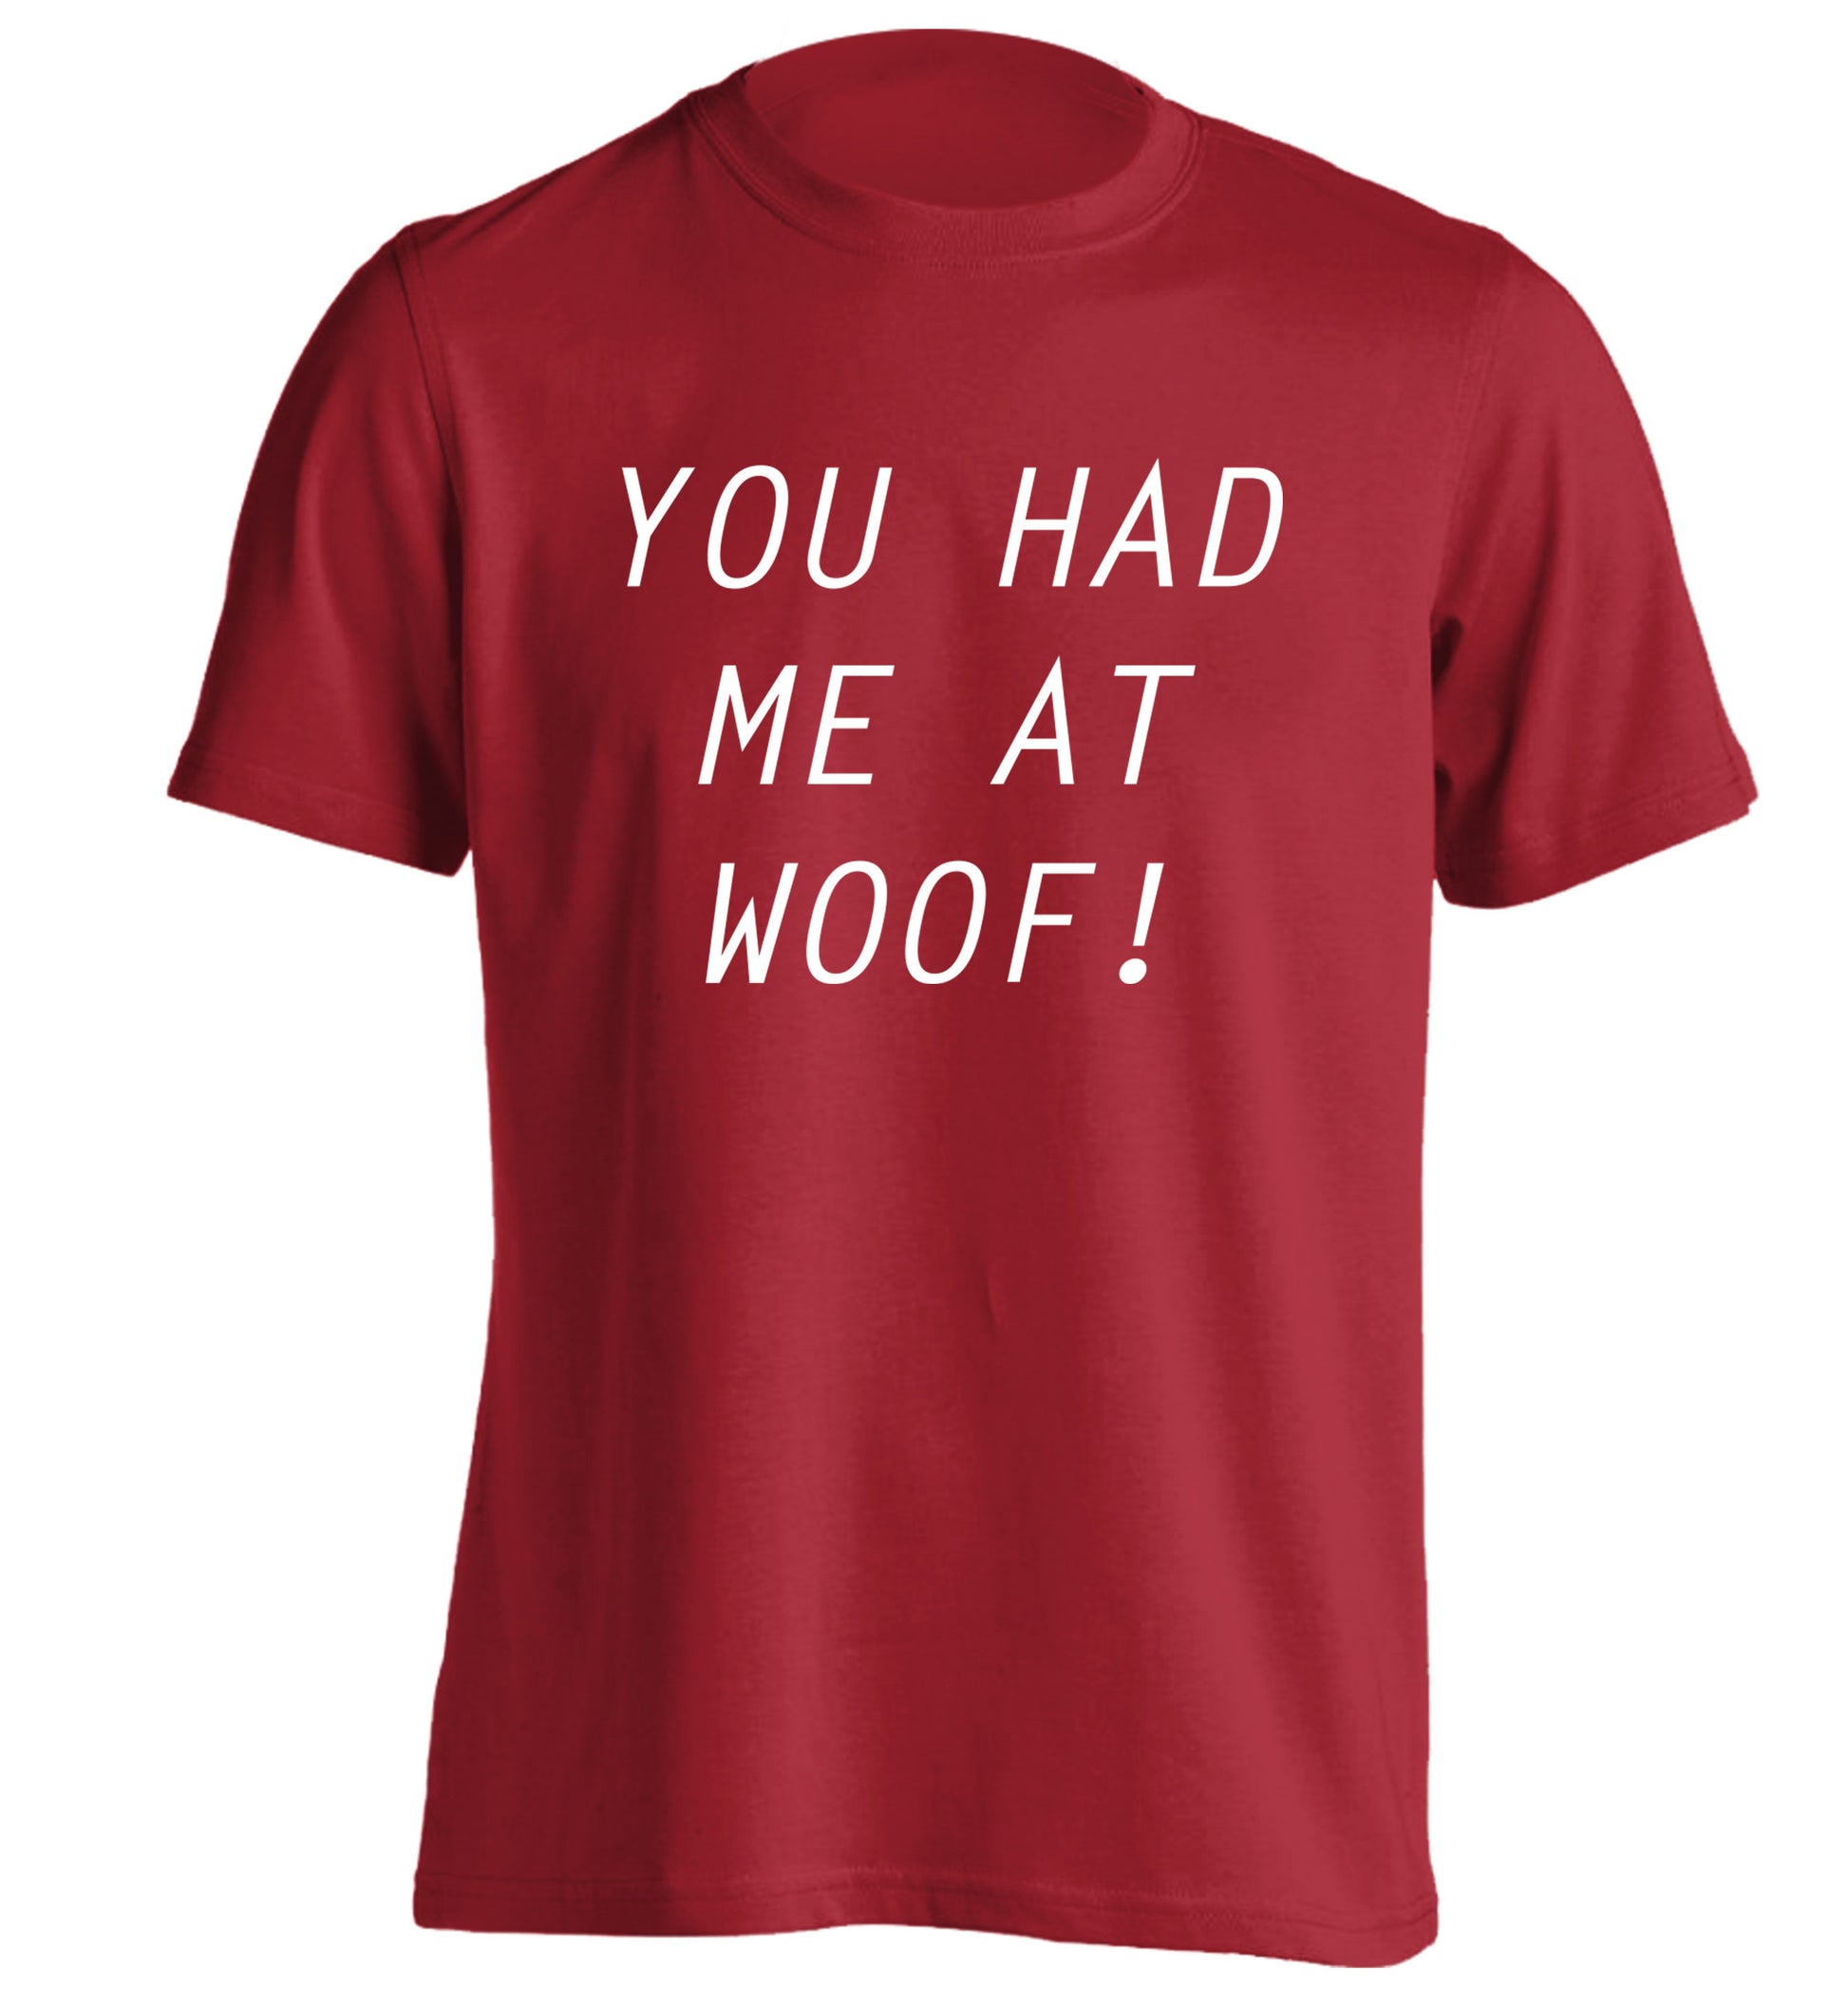 You had me at woof adults unisex red Tshirt 2XL